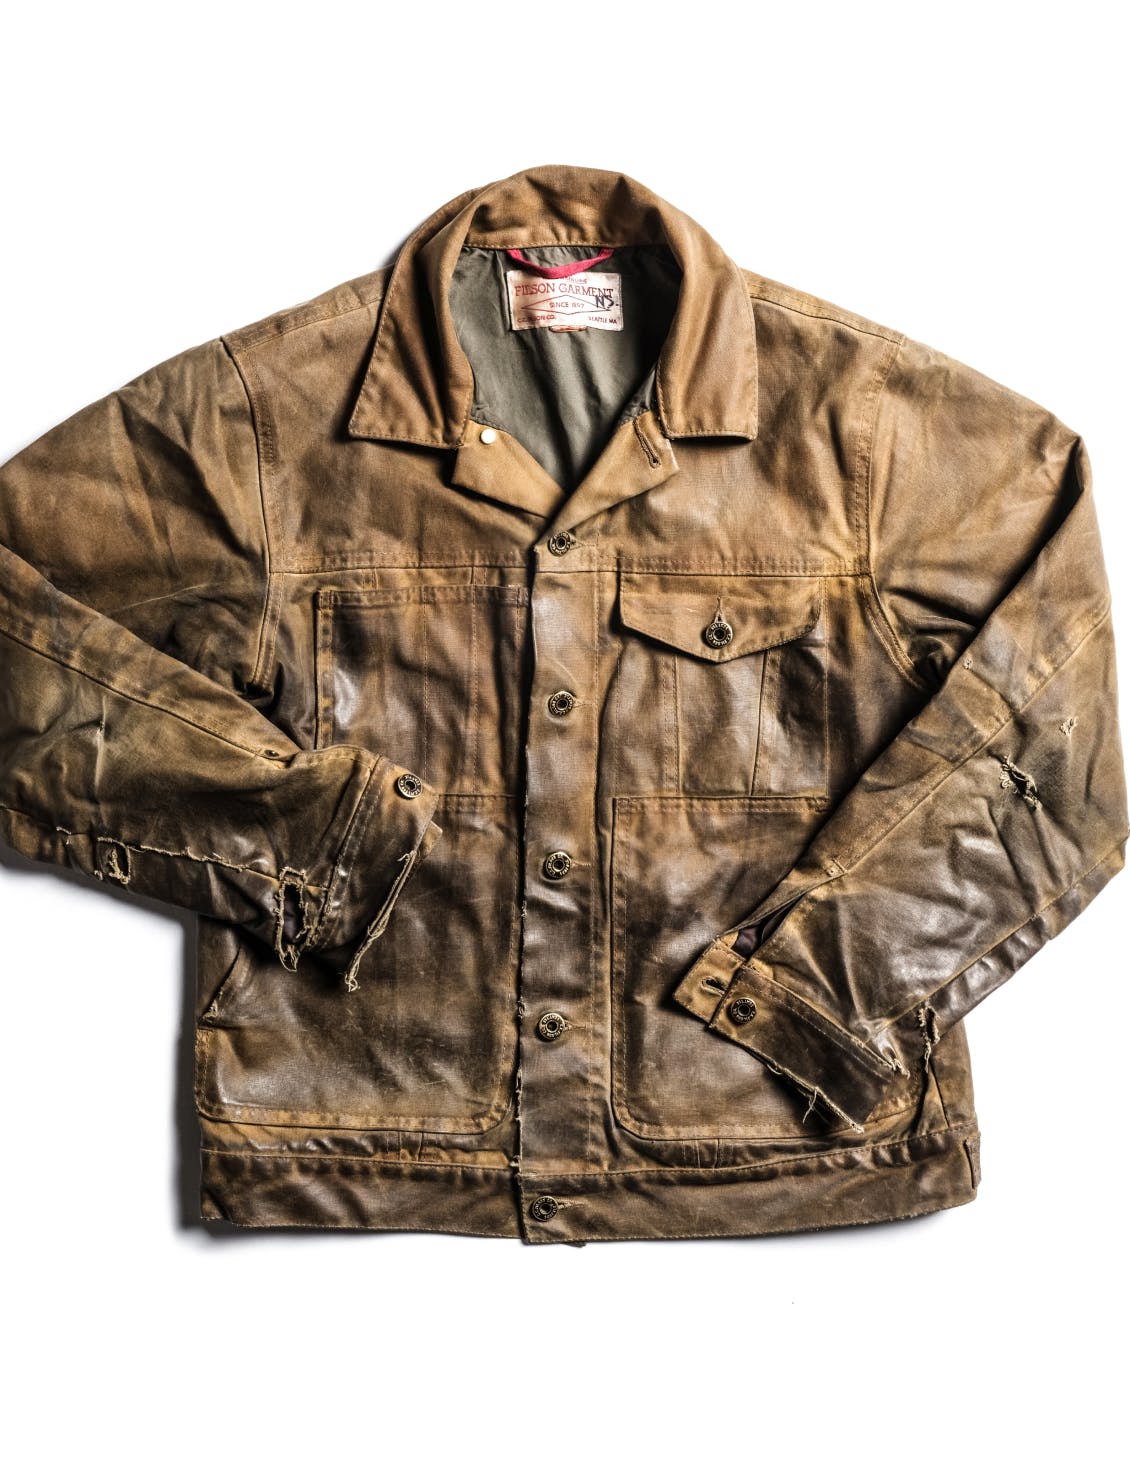 British Millerain & the History of Waxed Canvas | The Filson Journal